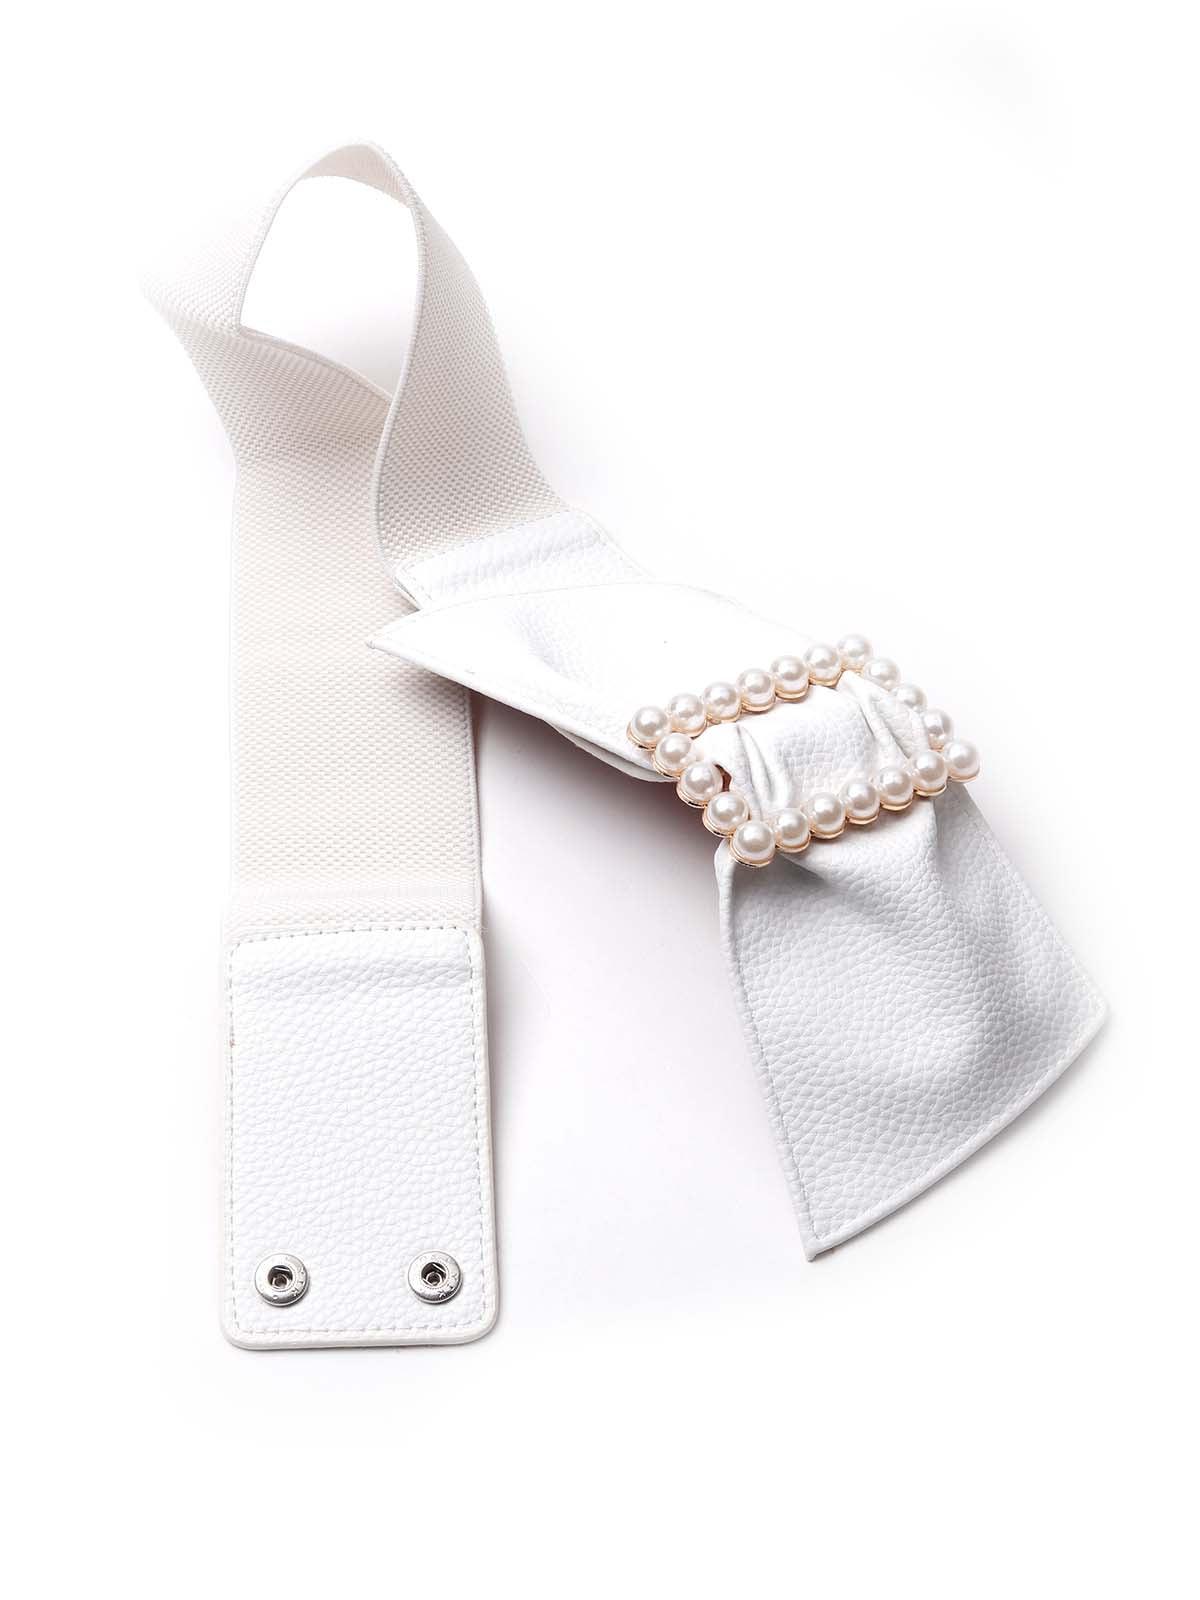 Stylish white waist belt studded with artifical pearls - Odette